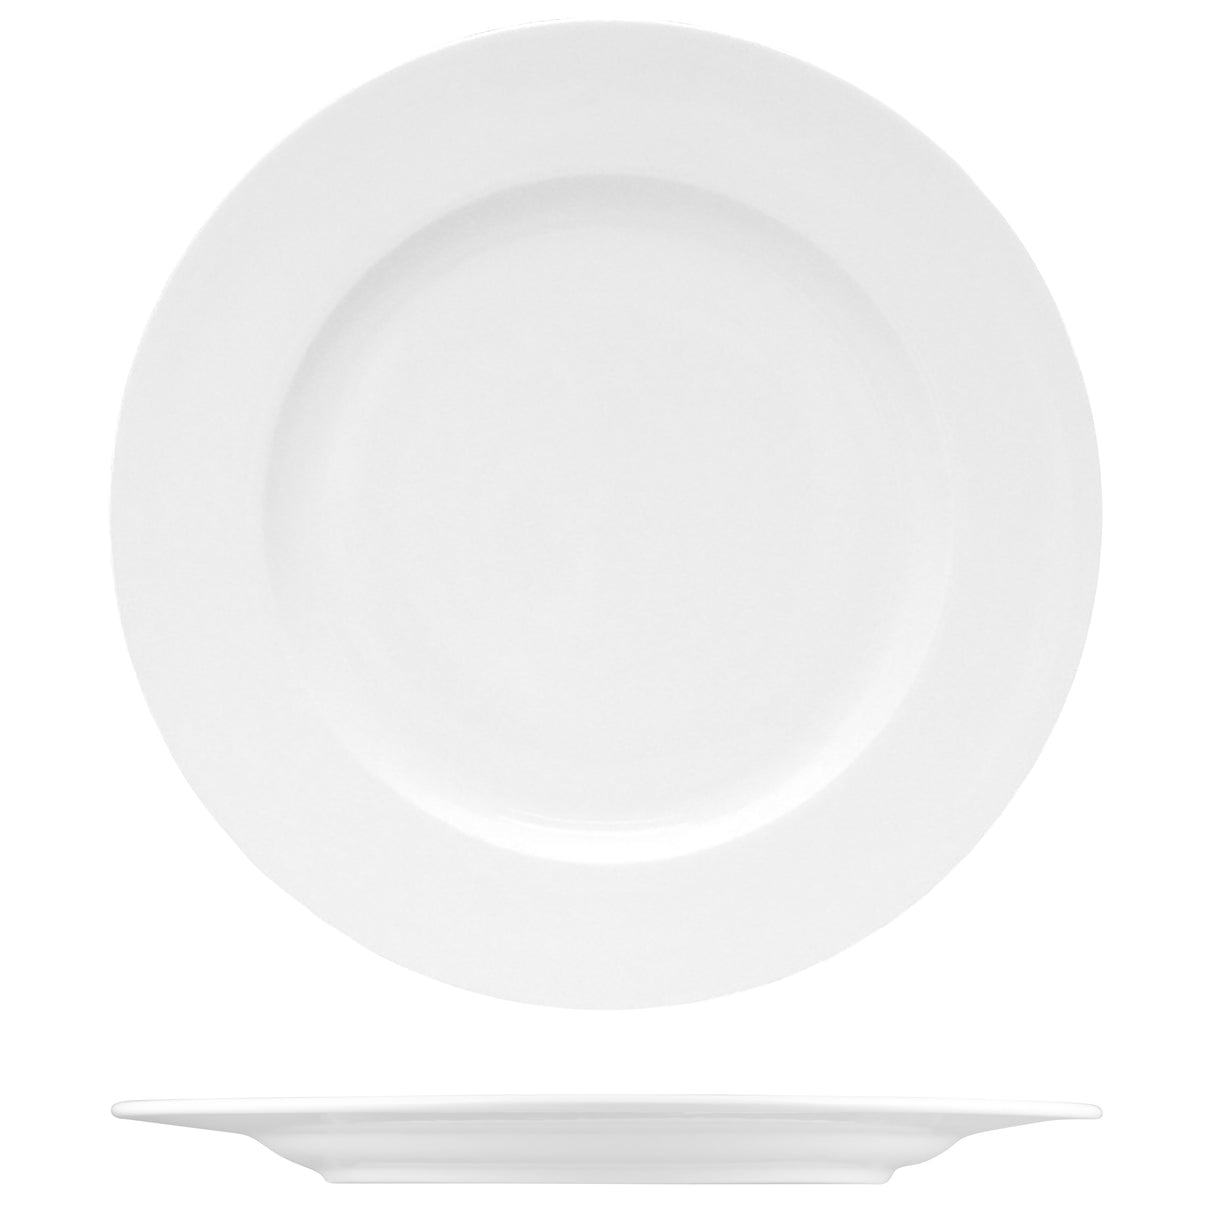 Plate - 240Mm, Ilona from Fortessa. made out of Bone China and sold in boxes of 24. Hospitality quality at wholesale price with The Flying Fork! 